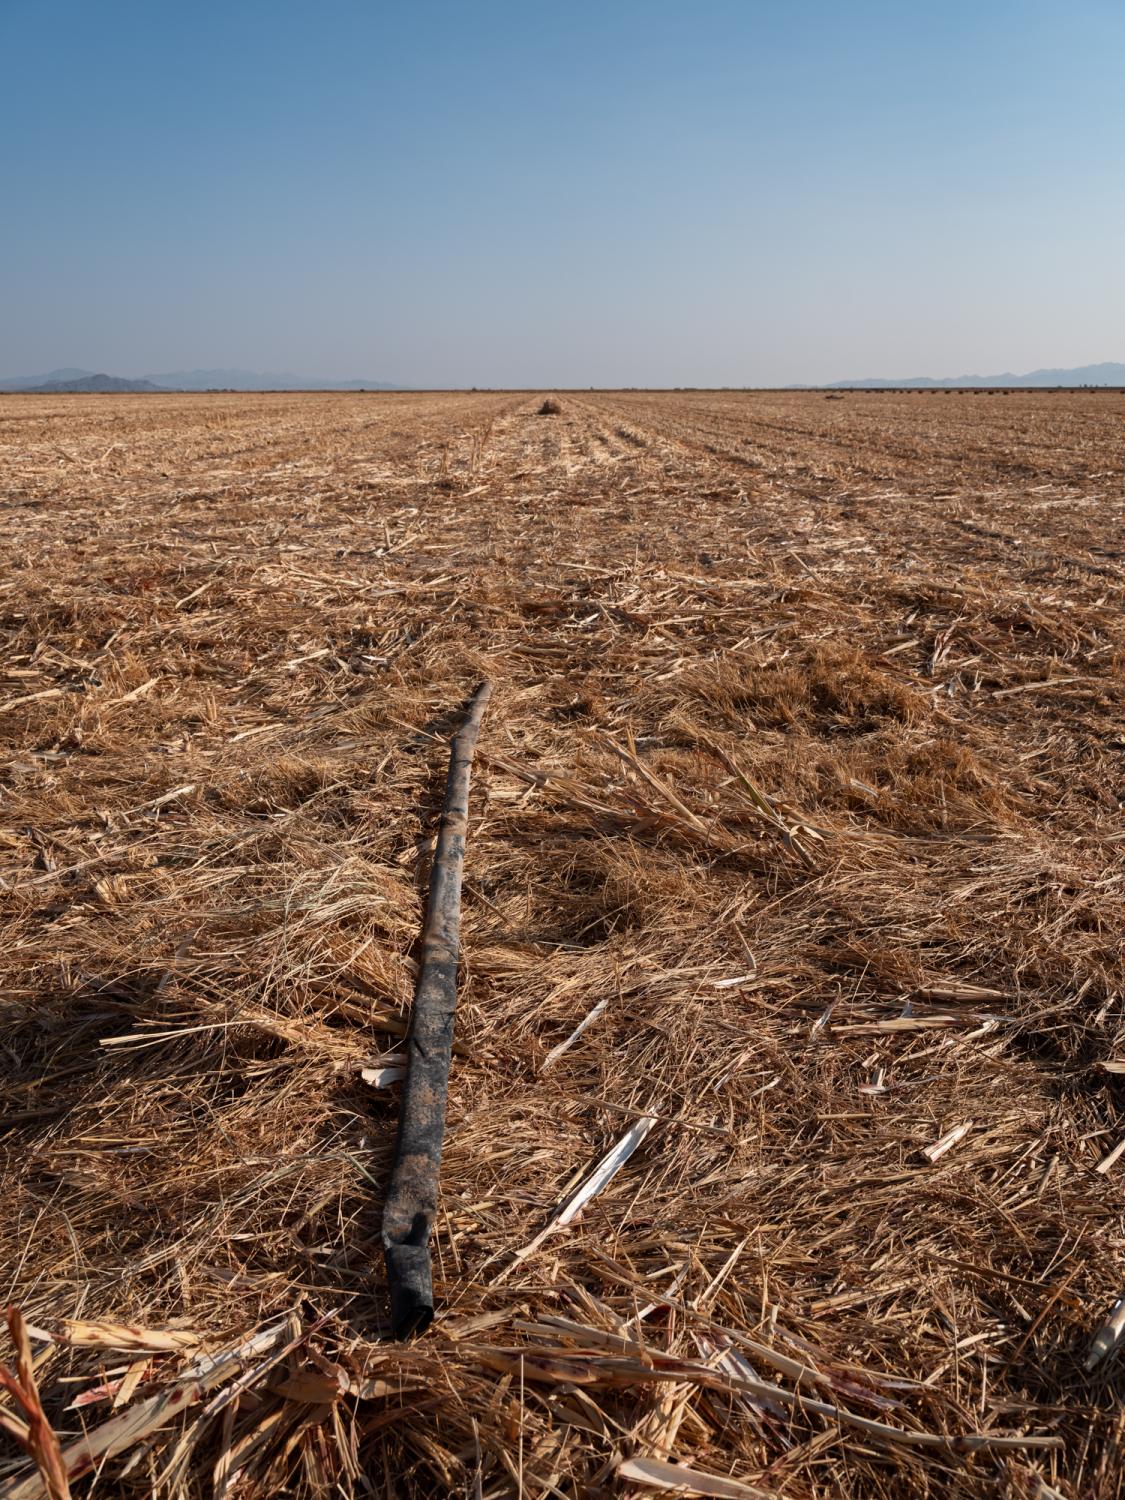 Irrigation Innovation - Bloomberg Businessweek - Tubing from the N-Drip system left in a field of sorghum...